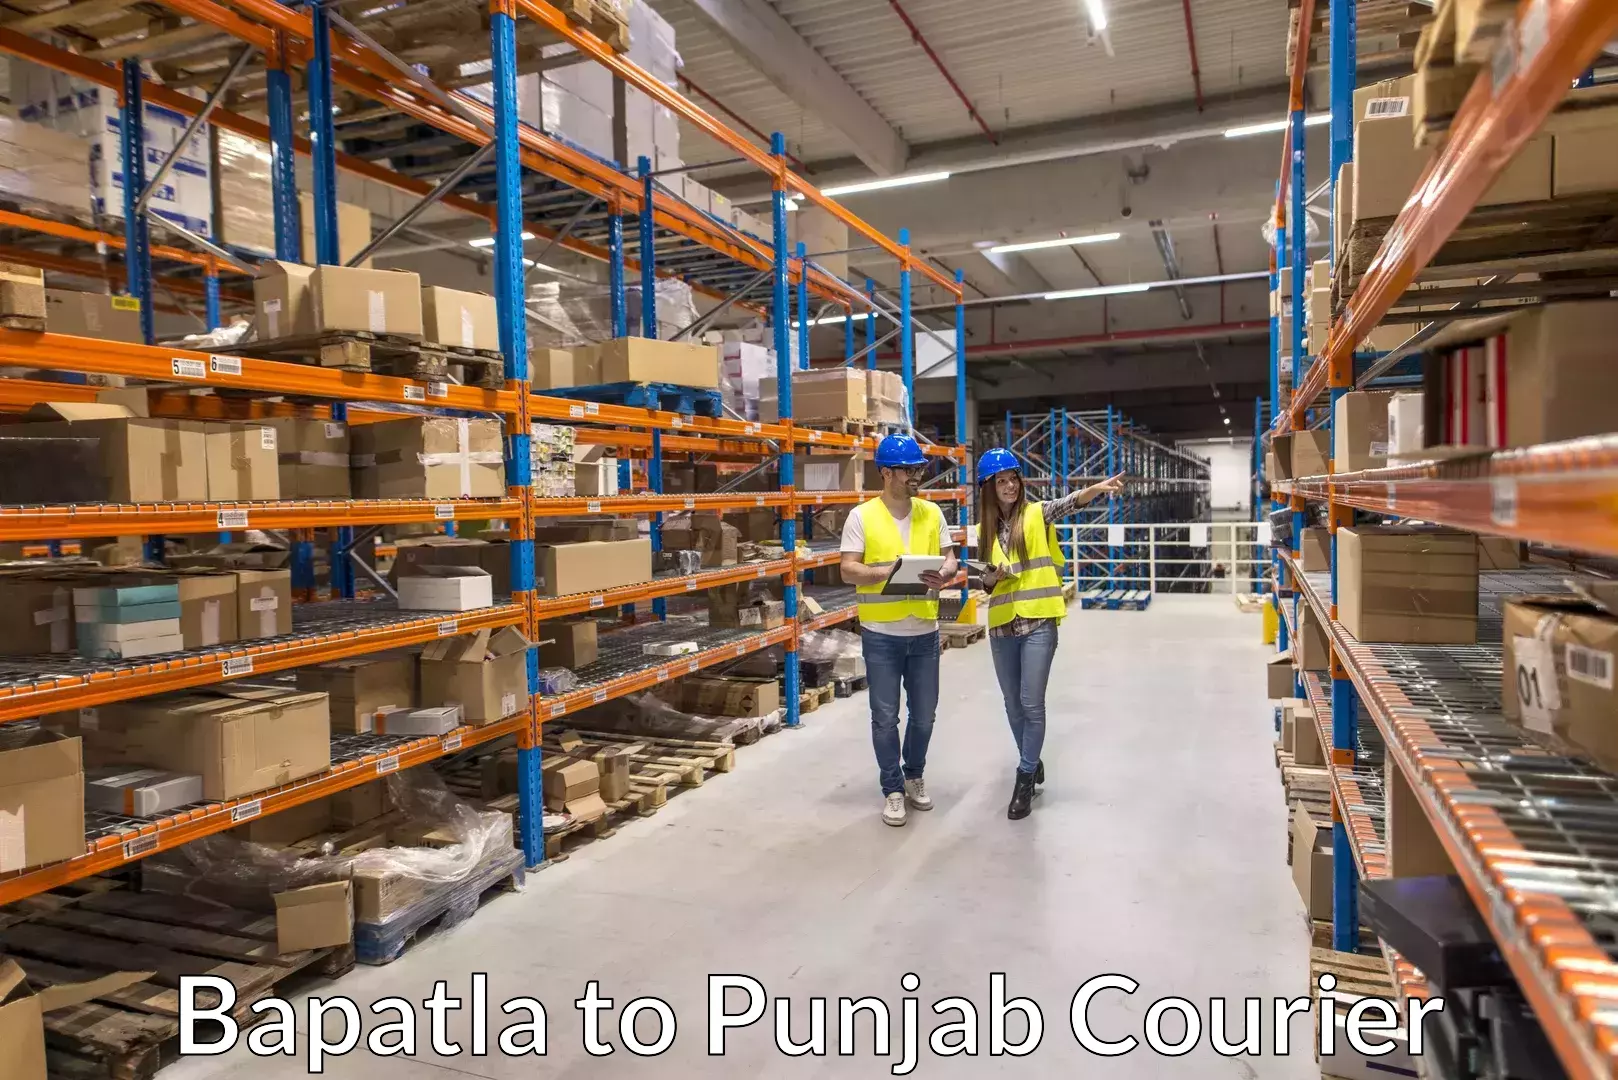 Moving and packing experts Bapatla to Punjab